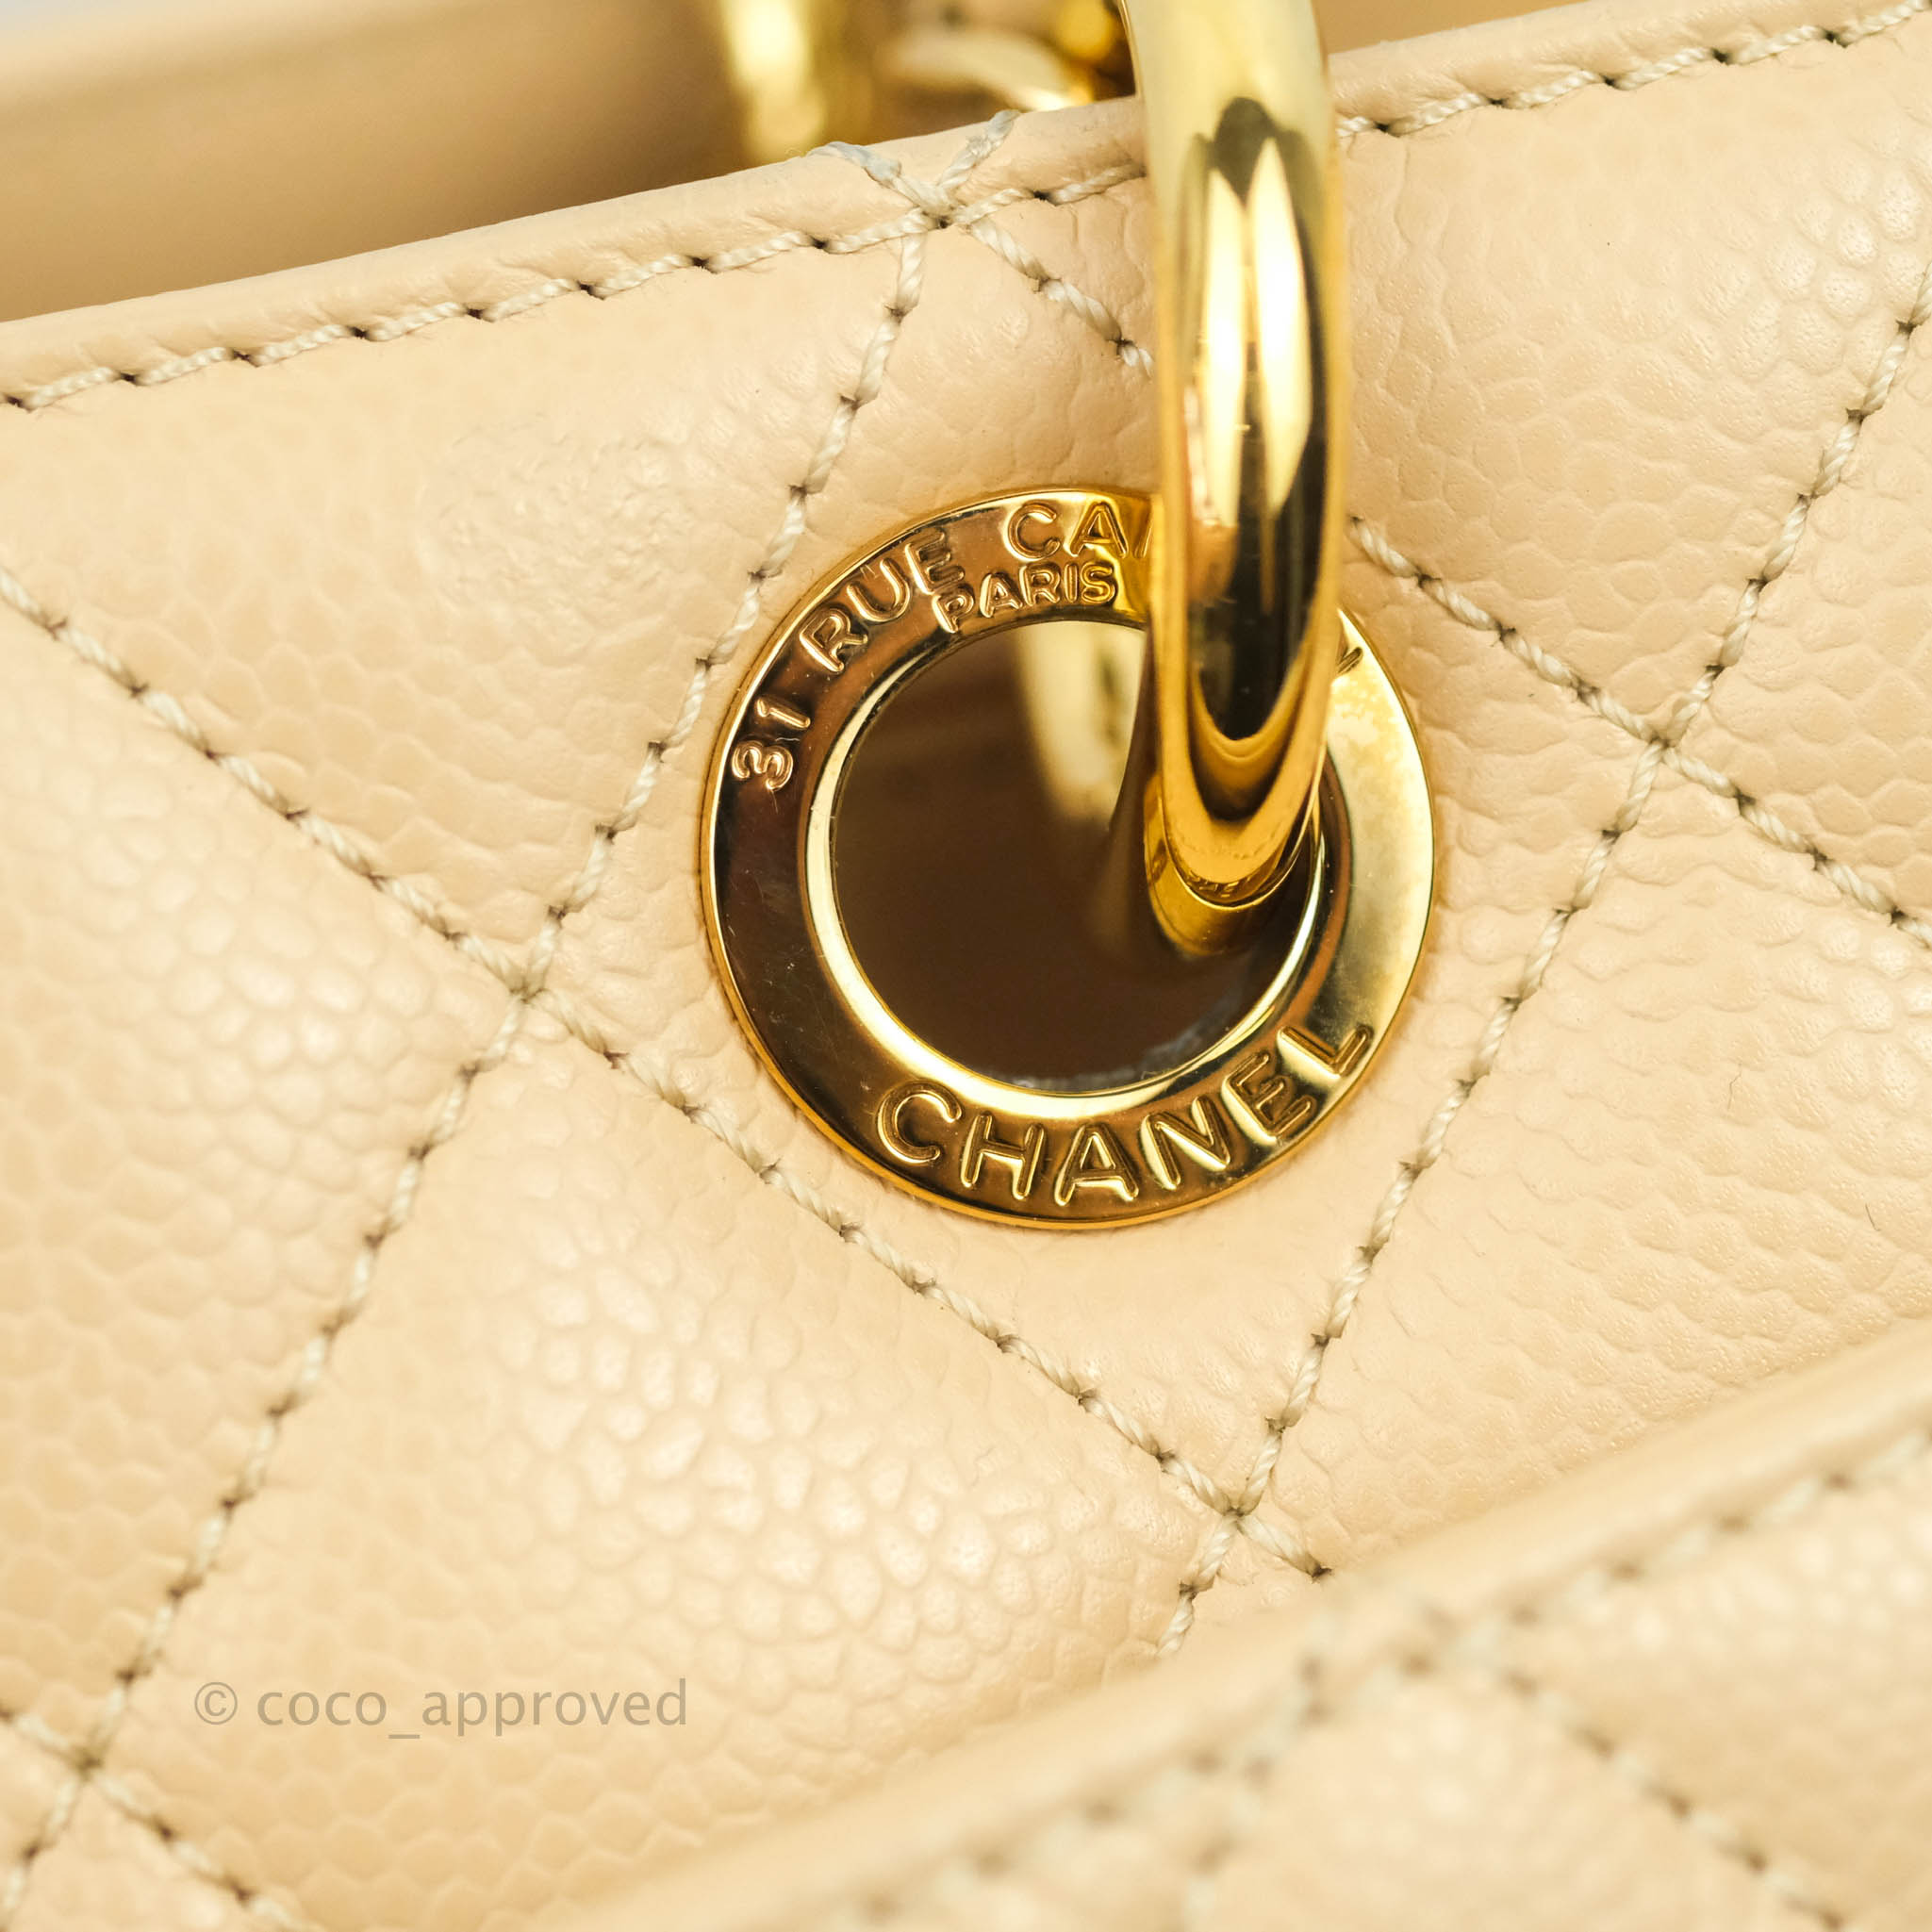 Chanel GST Beige Caviar Leather Grand Shopping Tote Chain Bag 10ccs114